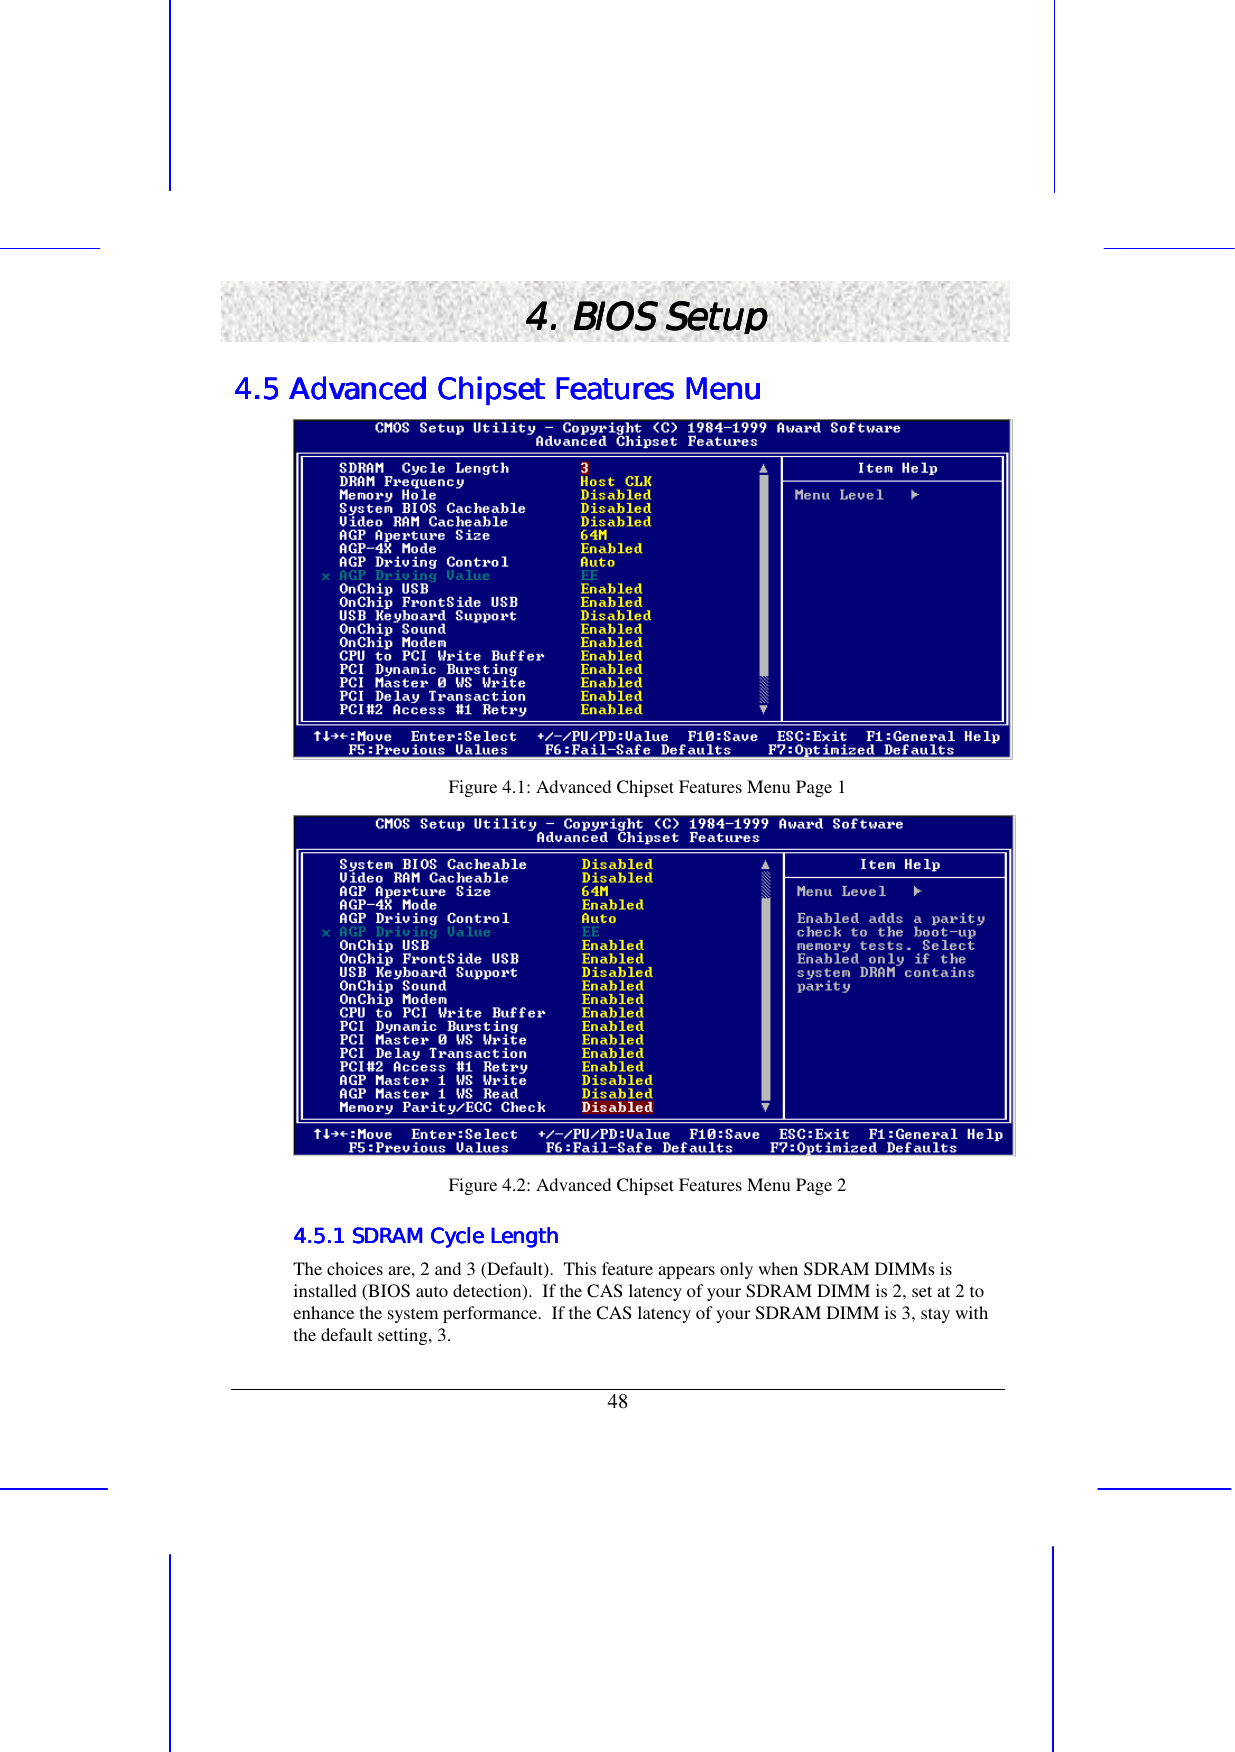   48 4. BIOS Setup4. BIOS Setup4. BIOS Setup4. BIOS Setup    4.5 Advanced Chipset Features Menu4.5 Advanced Chipset Features Menu4.5 Advanced Chipset Features Menu4.5 Advanced Chipset Features Menu     Figure 4.1: Advanced Chipset Features Menu Page 1  Figure 4.2: Advanced Chipset Features Menu Page 2 4.5.1 SDRAM Cycle Length4.5.1 SDRAM Cycle Length4.5.1 SDRAM Cycle Length4.5.1 SDRAM Cycle Length    The choices are, 2 and 3 (Default).  This feature appears only when SDRAM DIMMs is installed (BIOS auto detection).  If the CAS latency of your SDRAM DIMM is 2, set at 2 to enhance the system performance.  If the CAS latency of your SDRAM DIMM is 3, stay with the default setting, 3. 